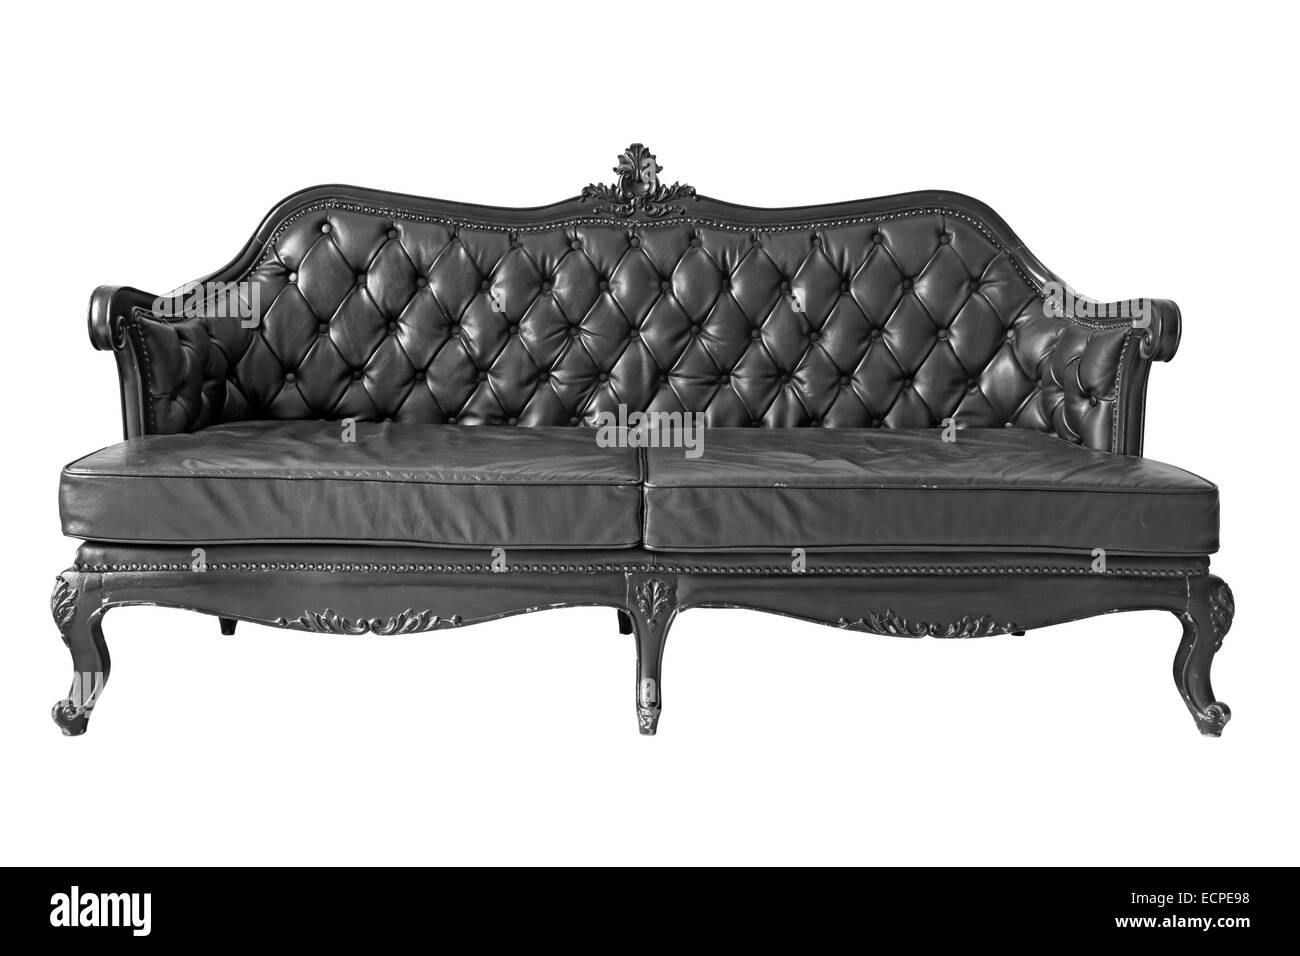 isolated Armchair black genuine leather classical style sofa with clipping path Stock Photo